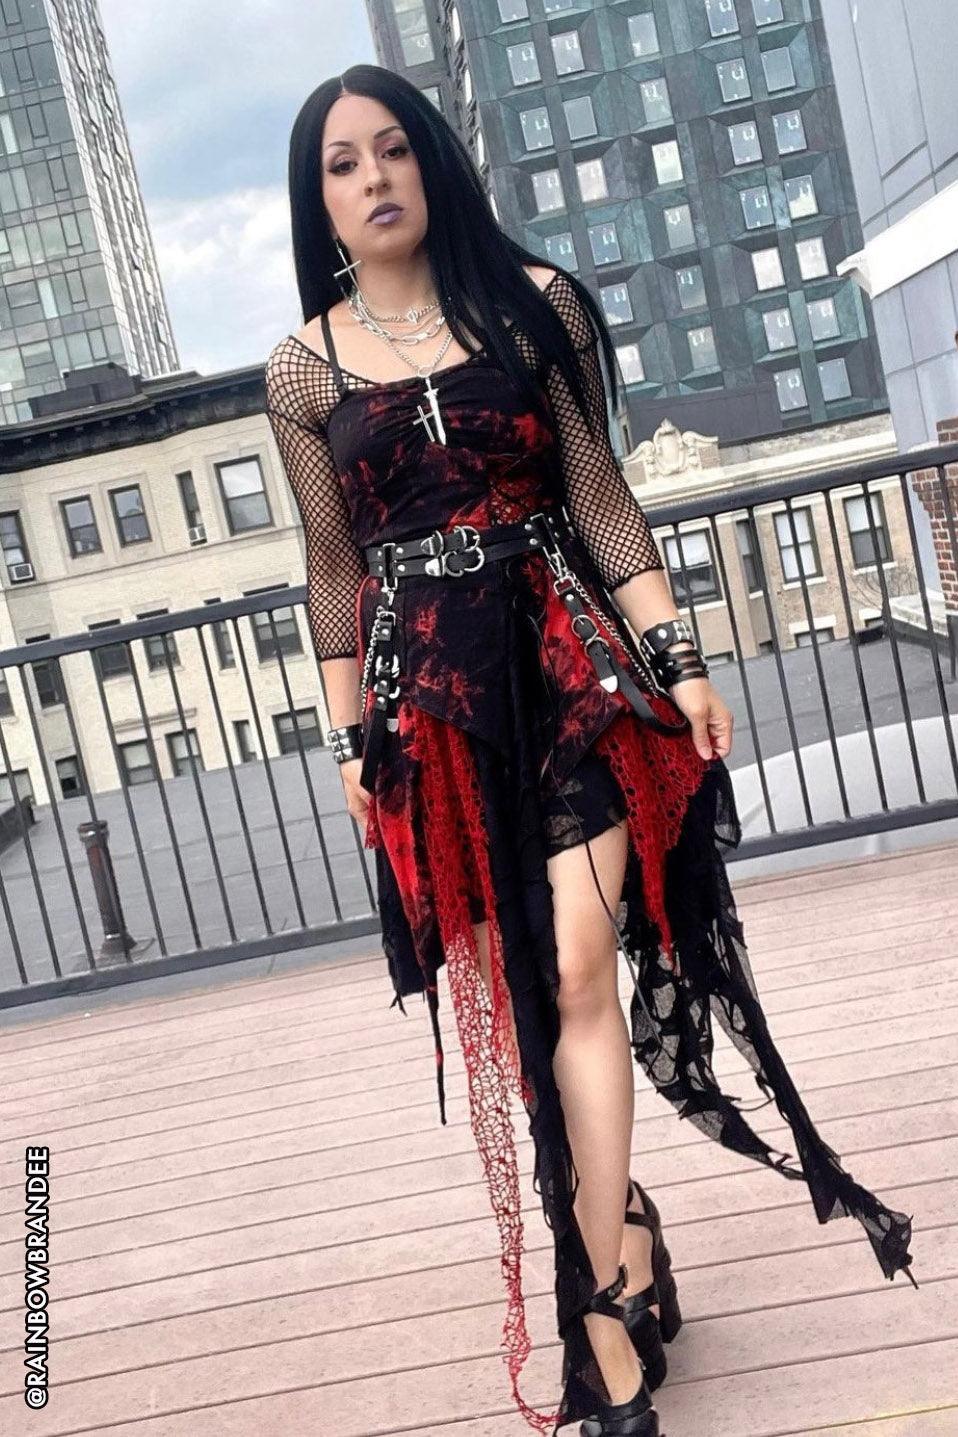 VampireFreaks. Goth Clothes, Emo and Punk Rock Fashion.